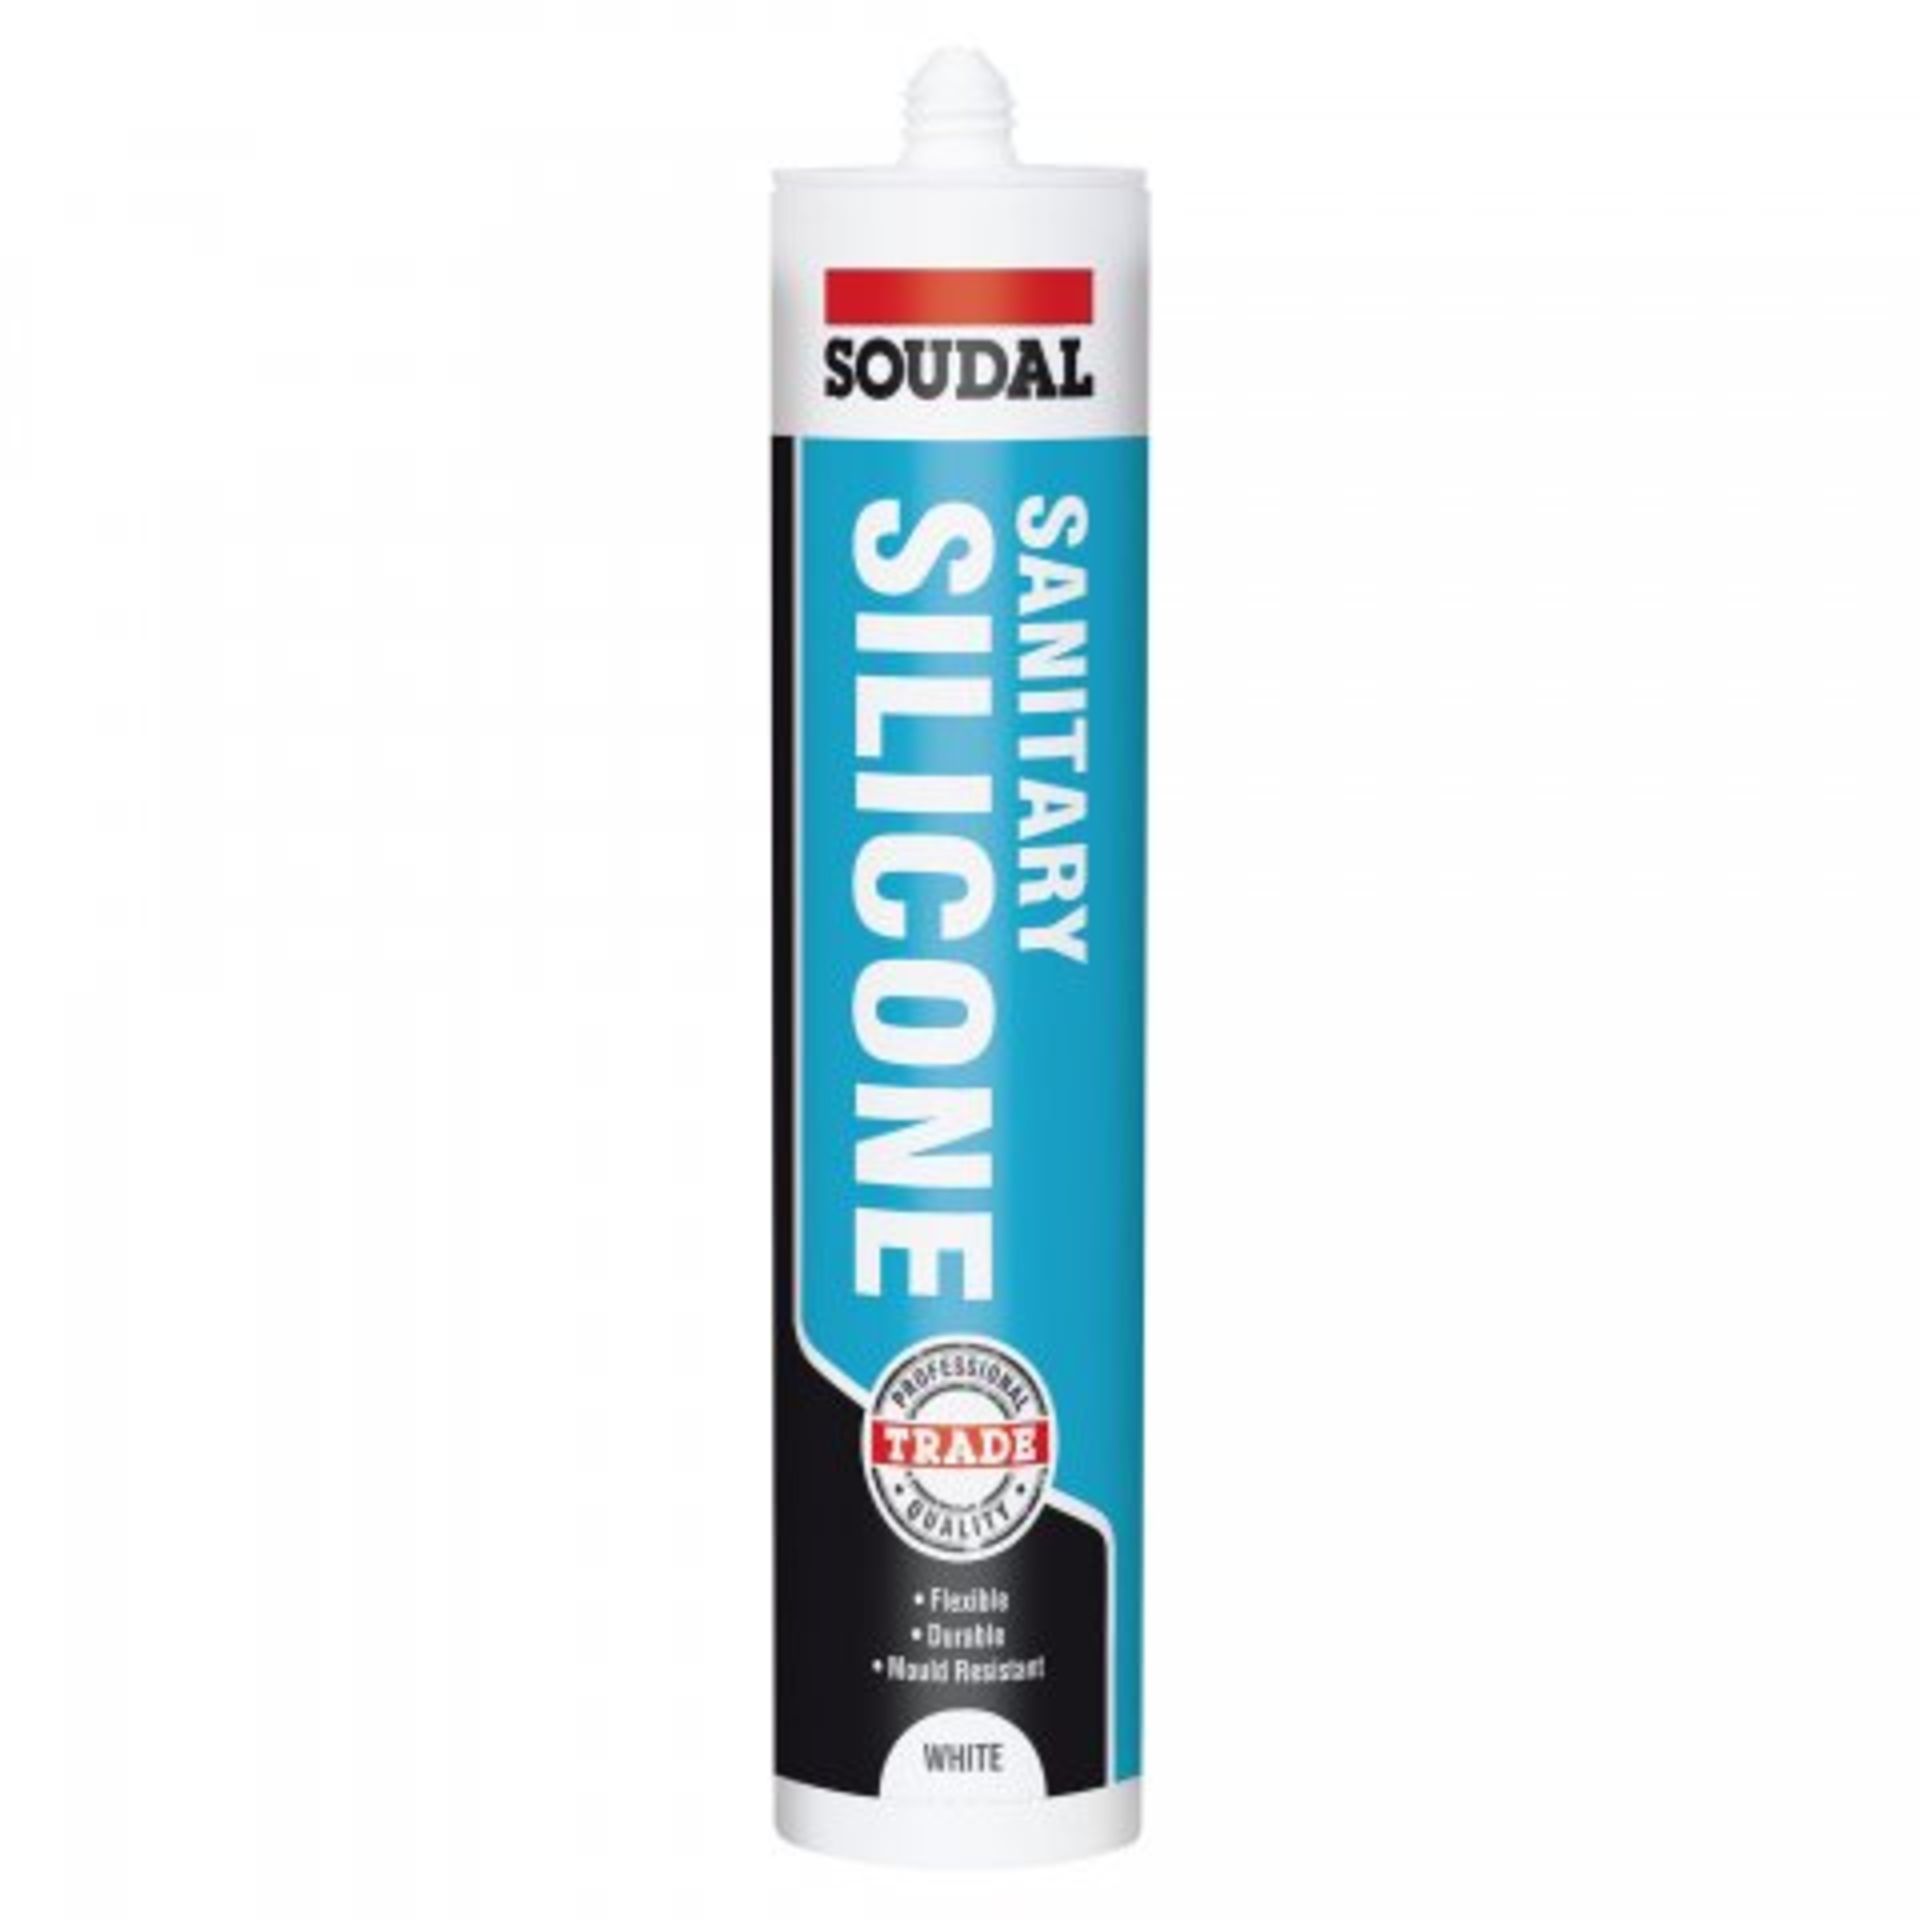 (O324) 2 x 300ml Tubes White Sanitary Silicone Sealant. Acetoxy curing silicone specially formulated